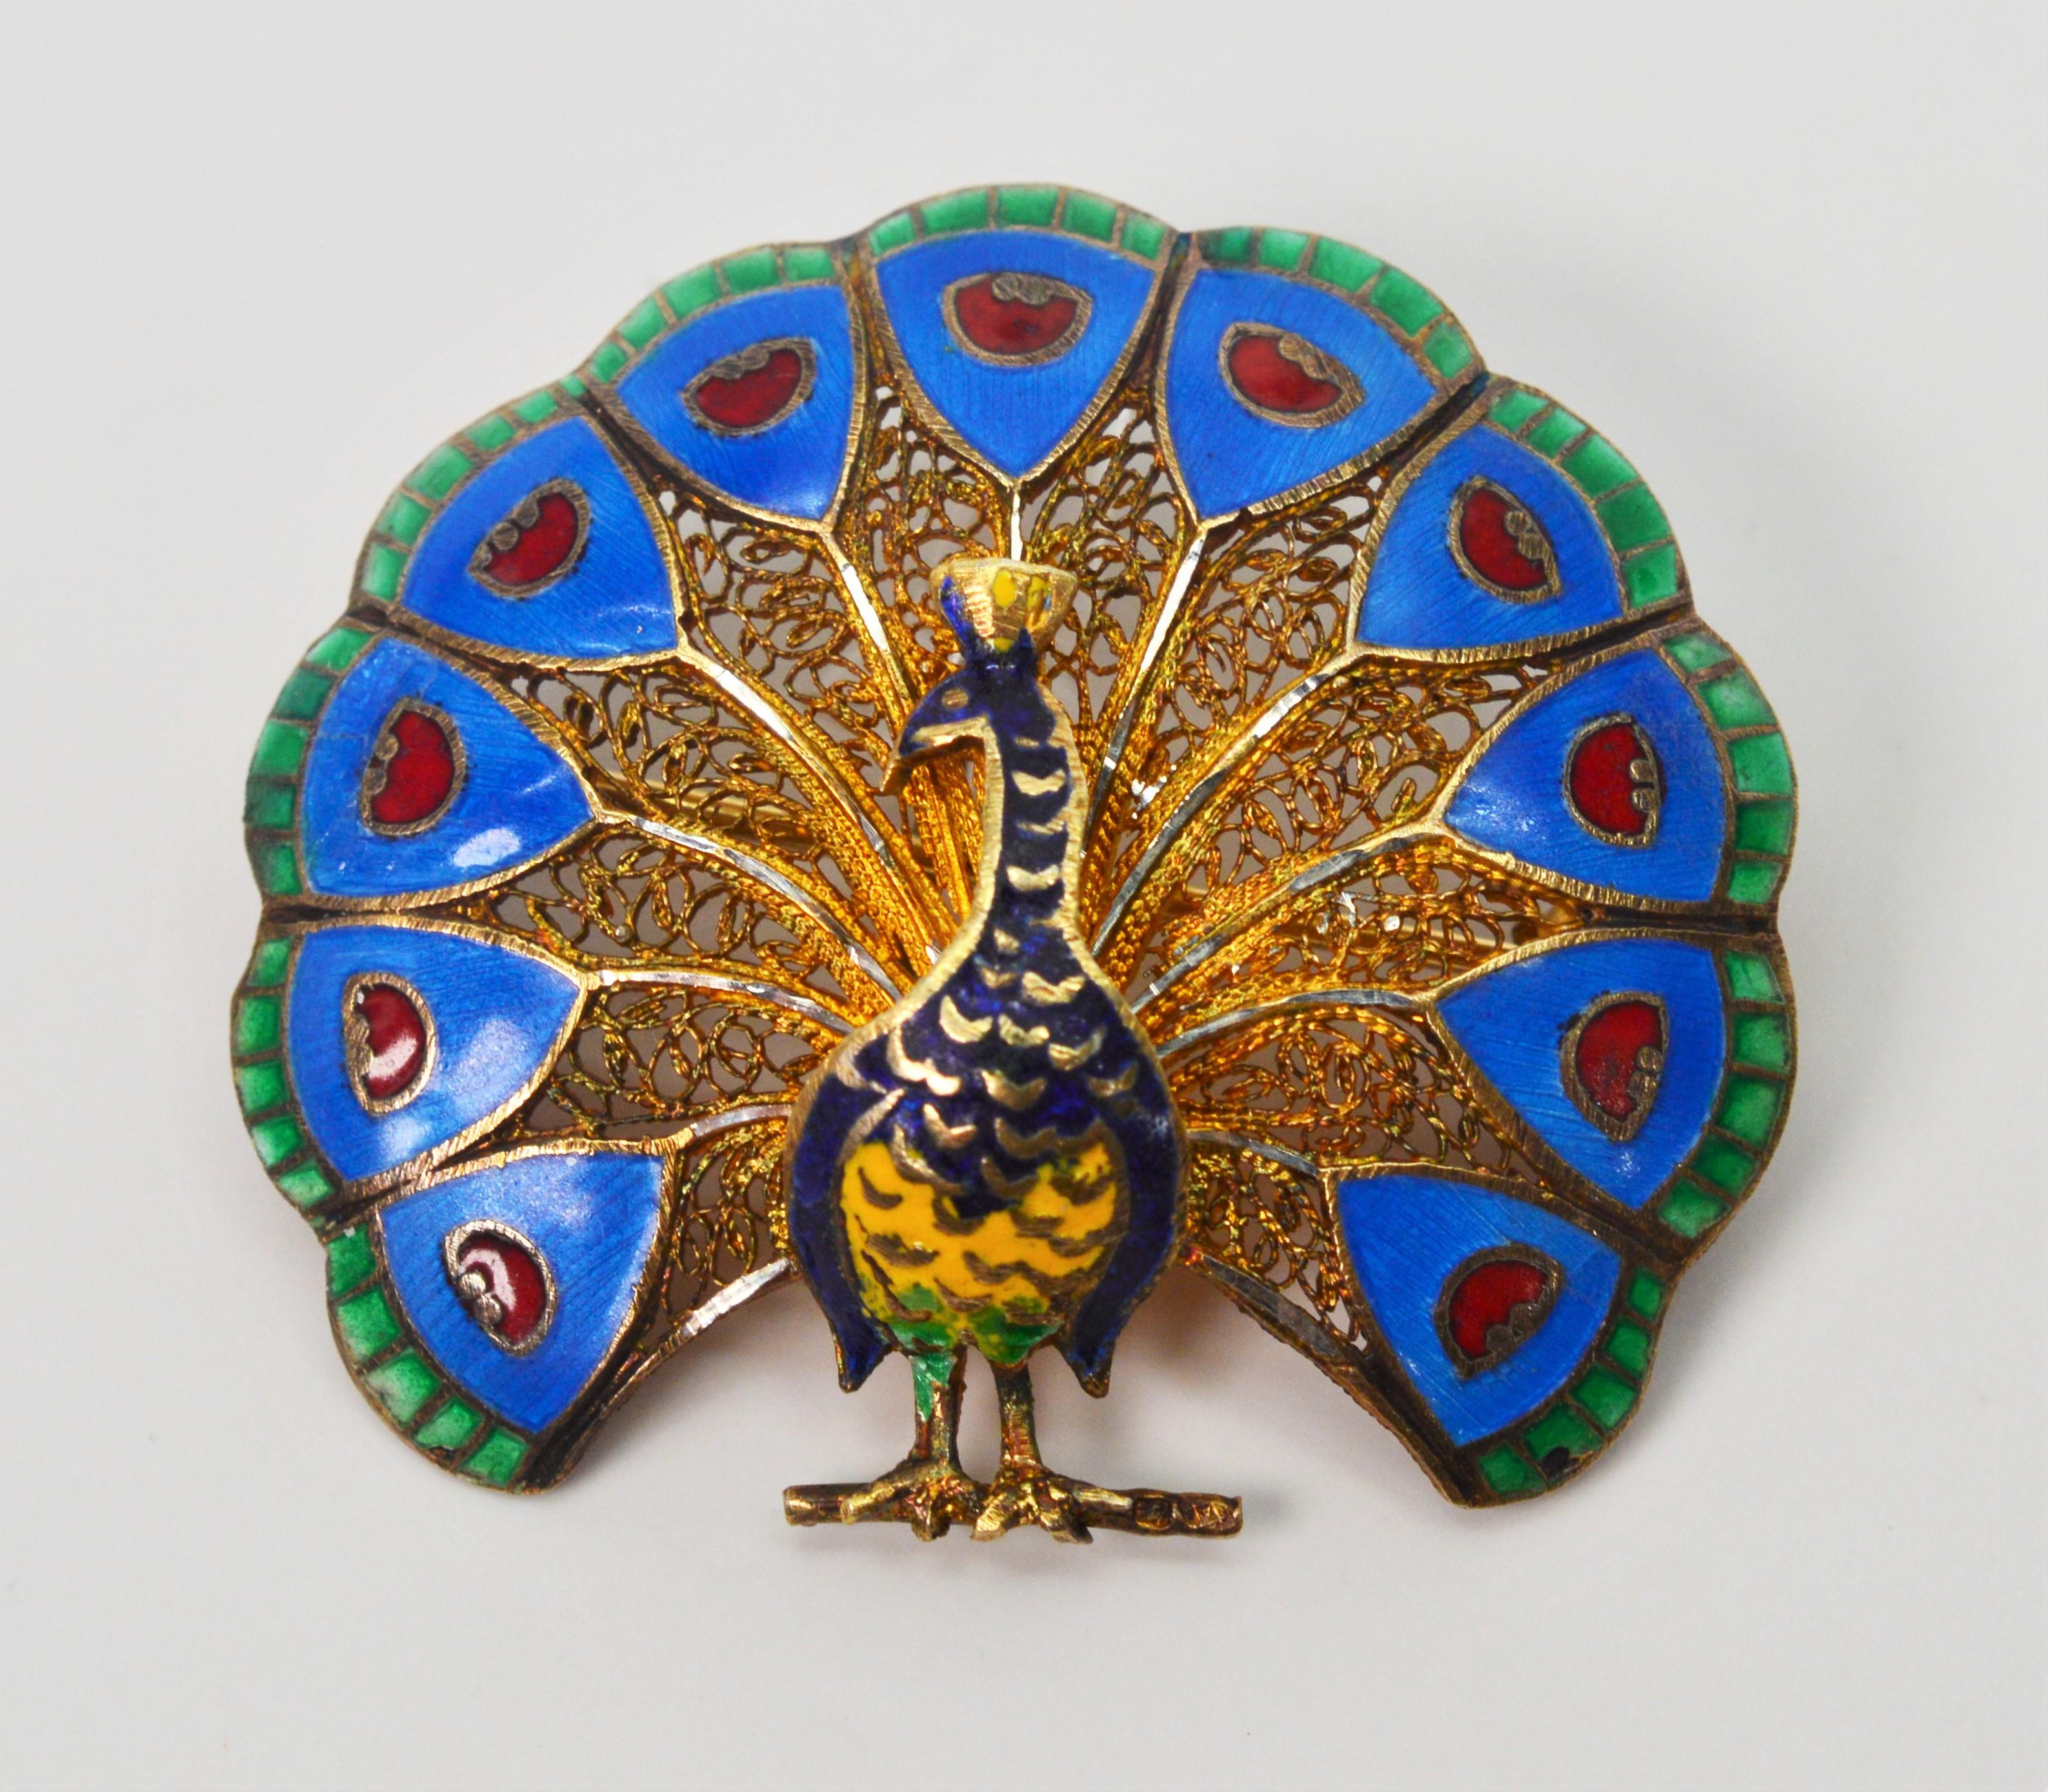 Often the symbol of pride and vanity, this artisan crafted Peacock has colorful plumage crafted with hand applied enamels outlined in gold. Made on the subcontinent of India, the brooch is constructed of ten carat yellow gold with a decorative